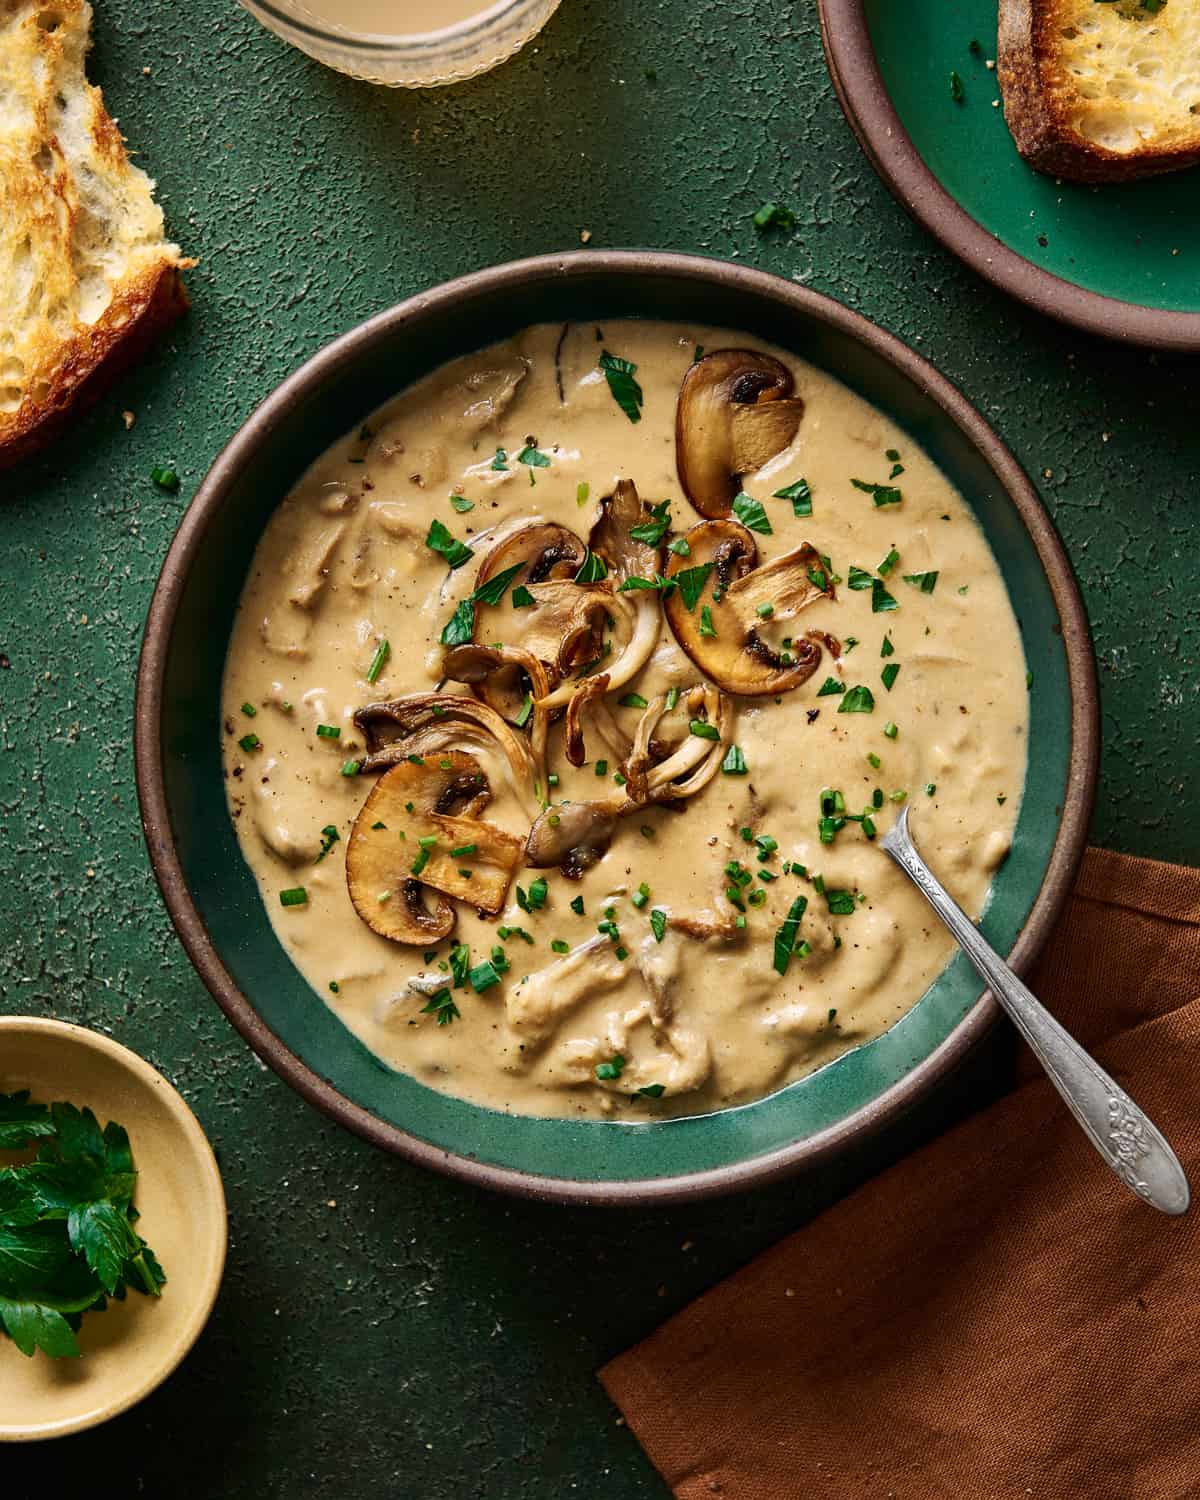 Creamy vegan mushroom soup with seared mushrooms in a green ceramic bowl on a green table.